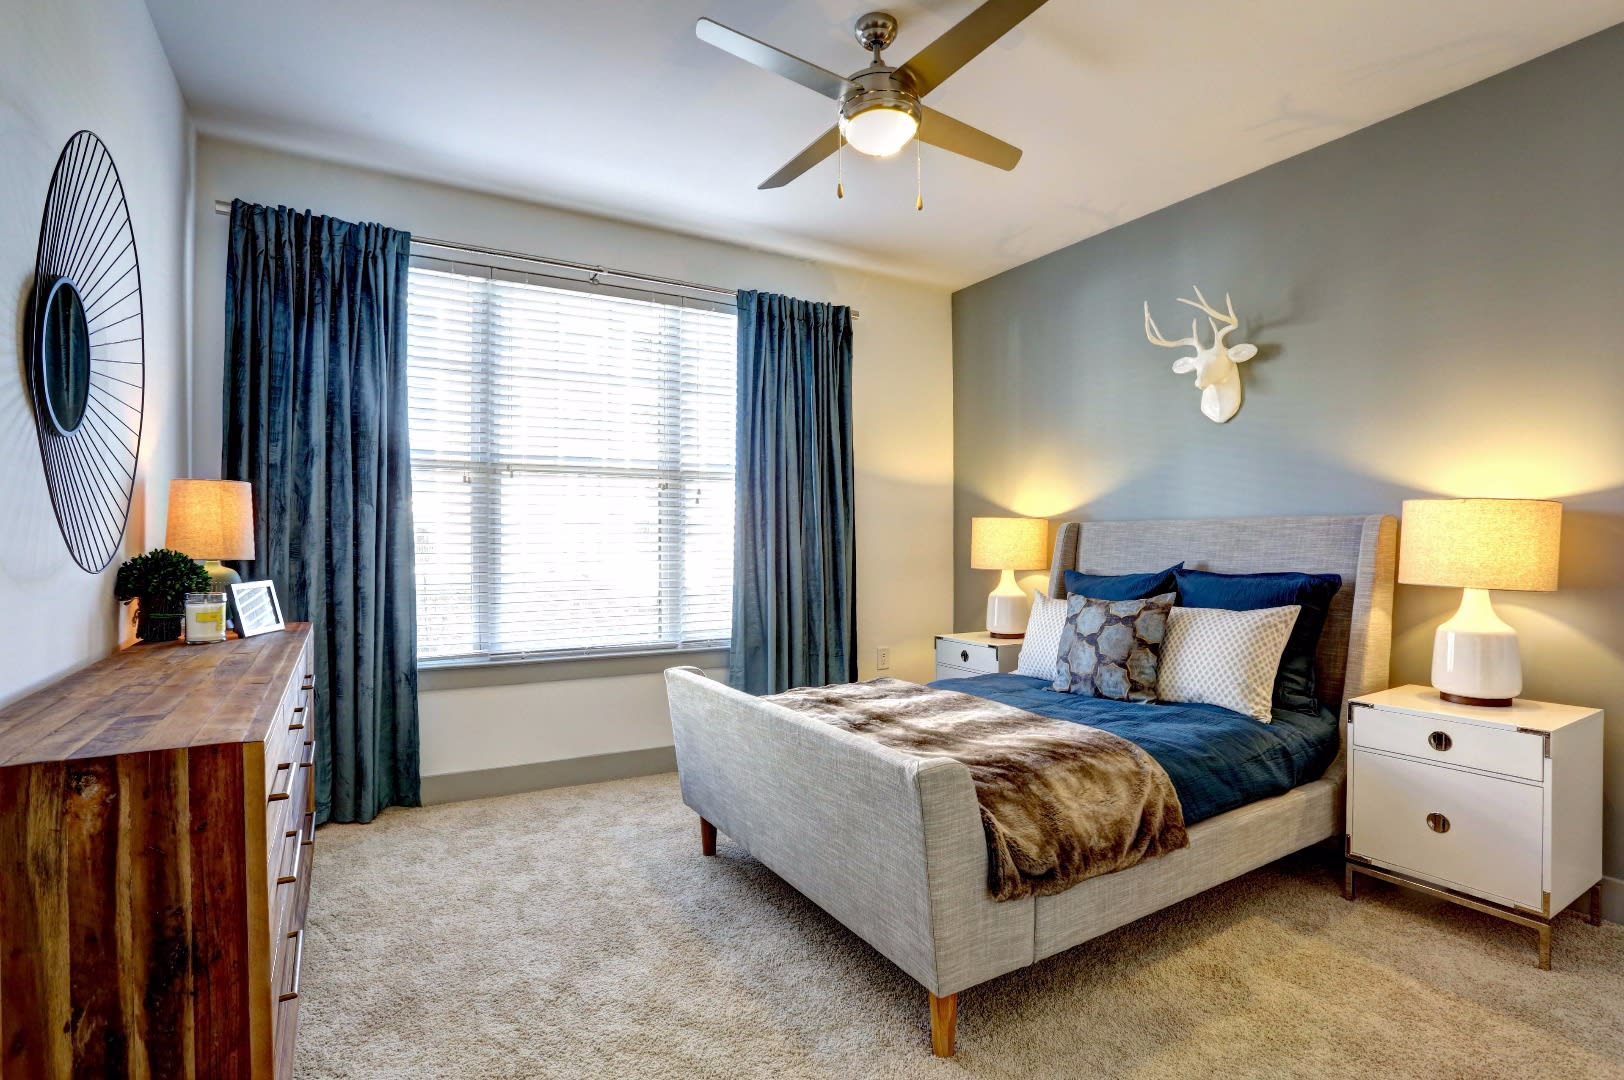 Dog-Friendly Apartments in Alpharetta, GA -The Haven at Avalon - Furnished Bedroom with Plush Carpeting, Large Window, and a Ceiling Fan